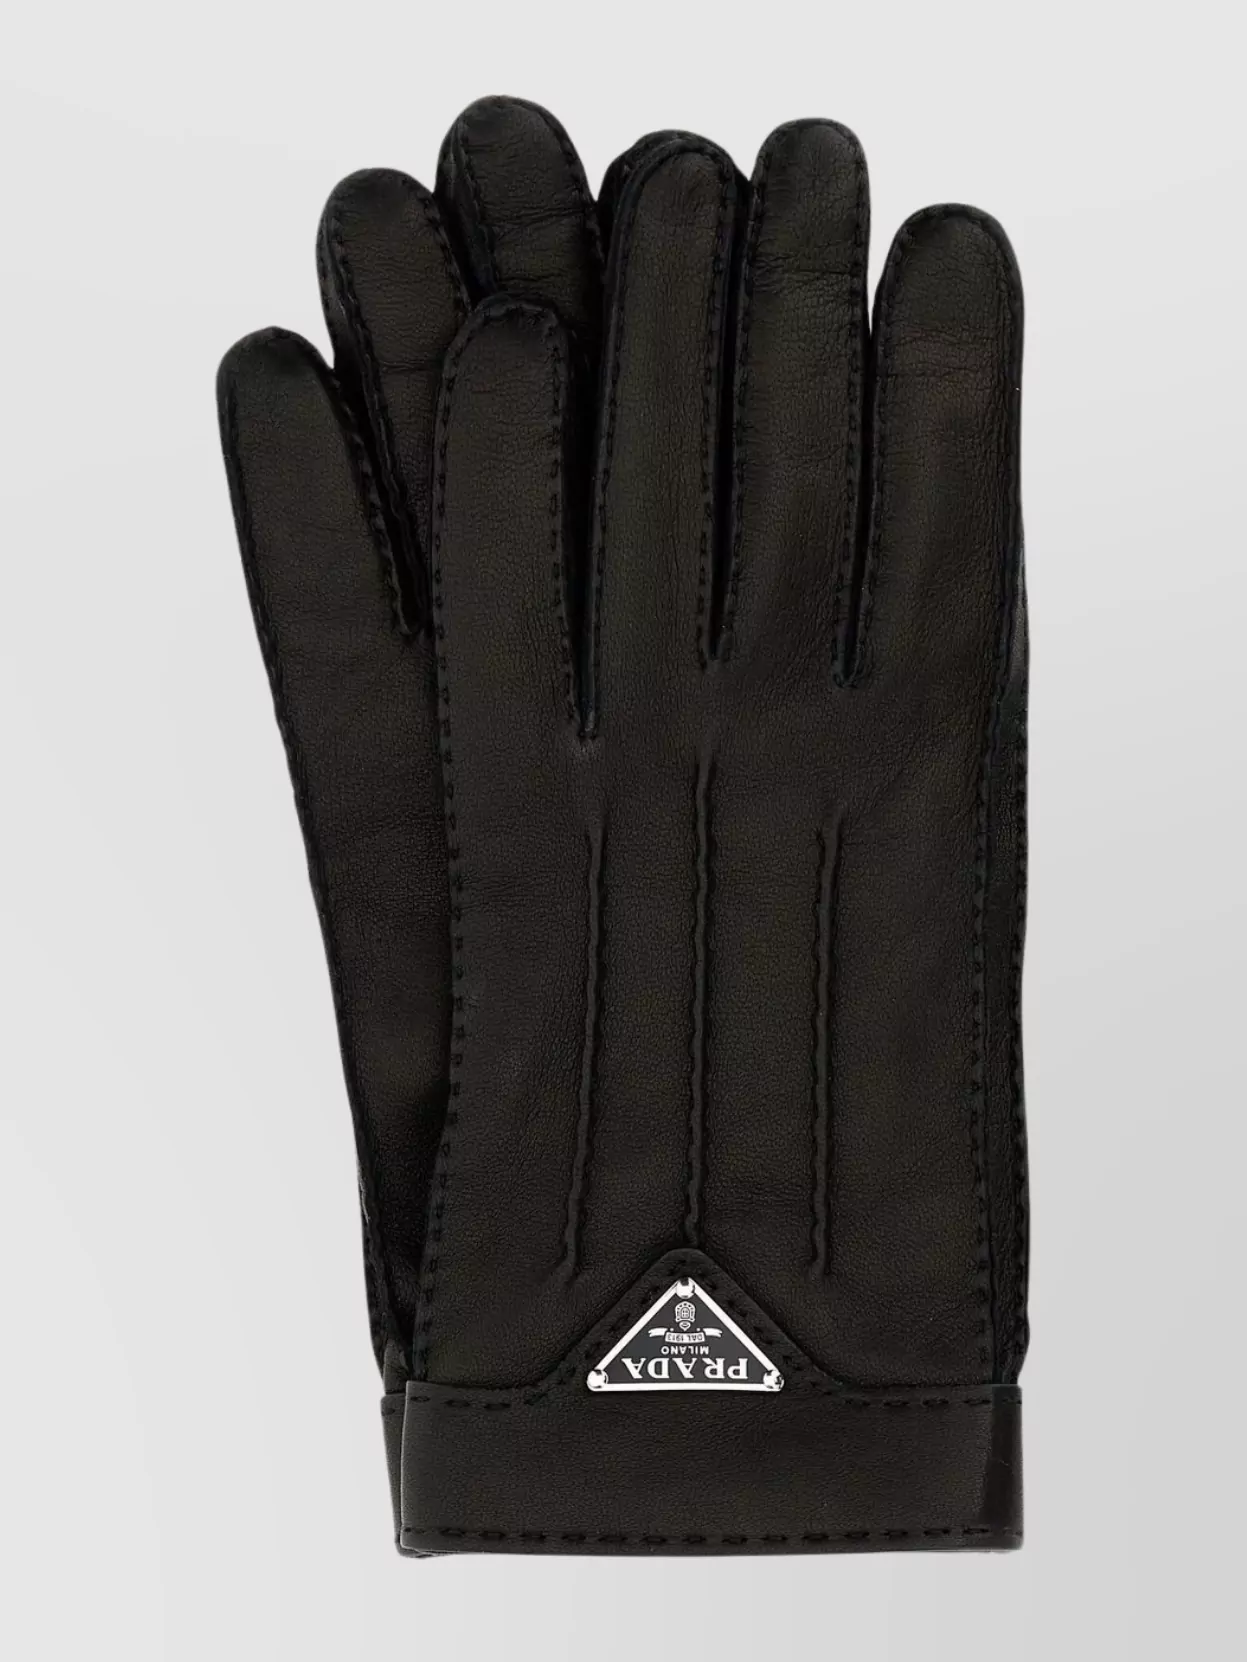 Shop Prada Nappa Leather Gloves Featuring Stitched Detailing